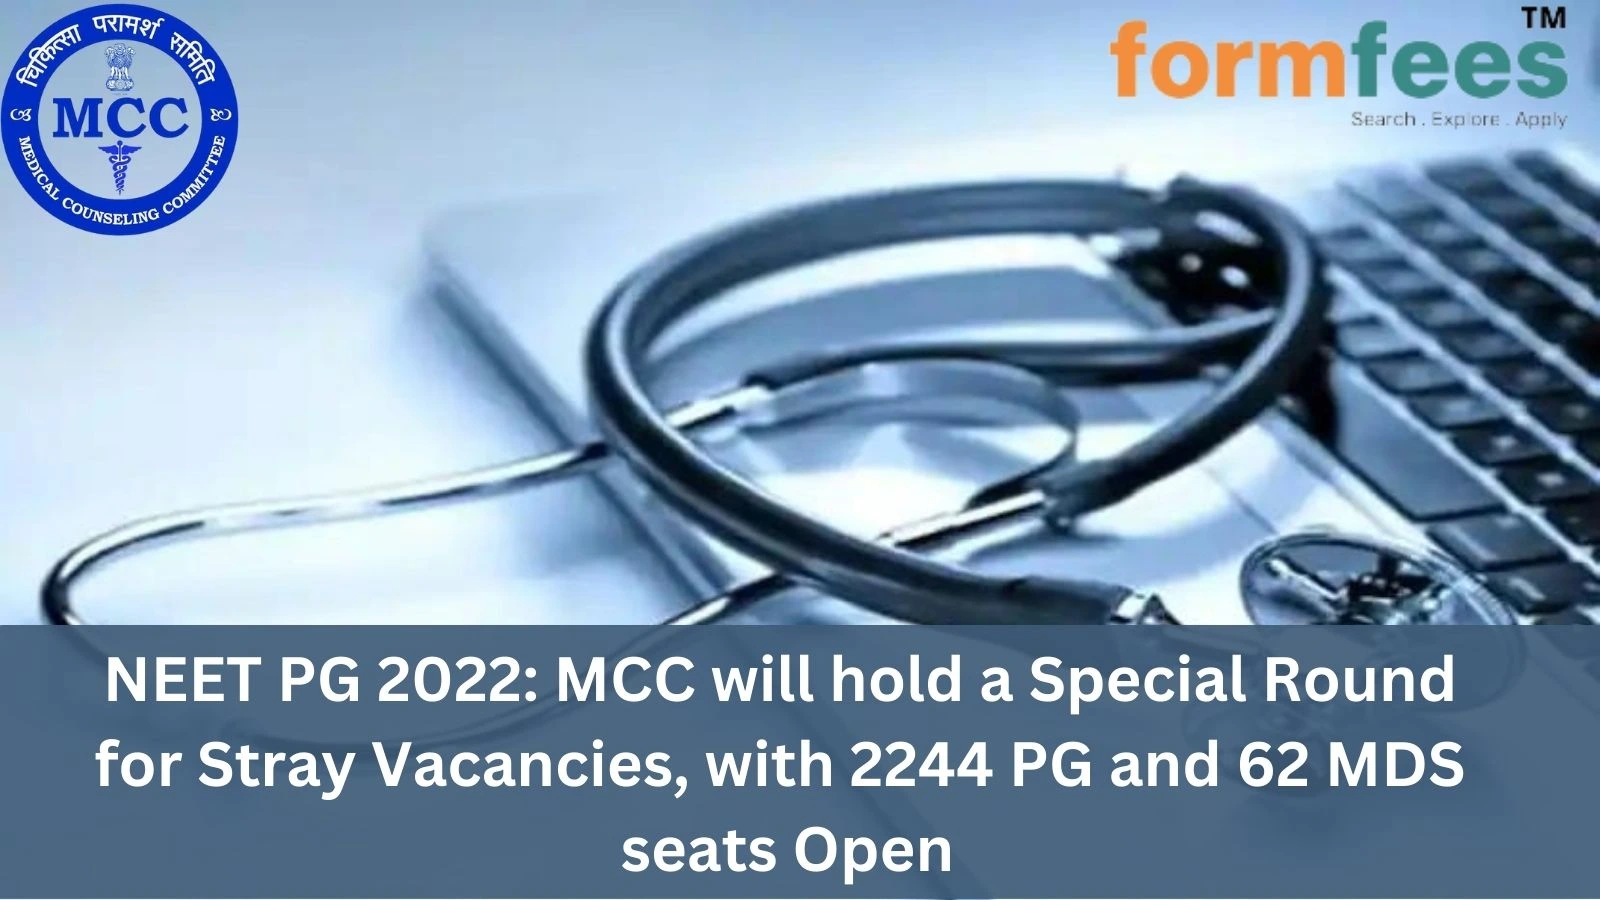 NEET PG 2022: MCC will hold a Special Round for Stray Vacancies, with 2244 PG and 62 MDS seats Open